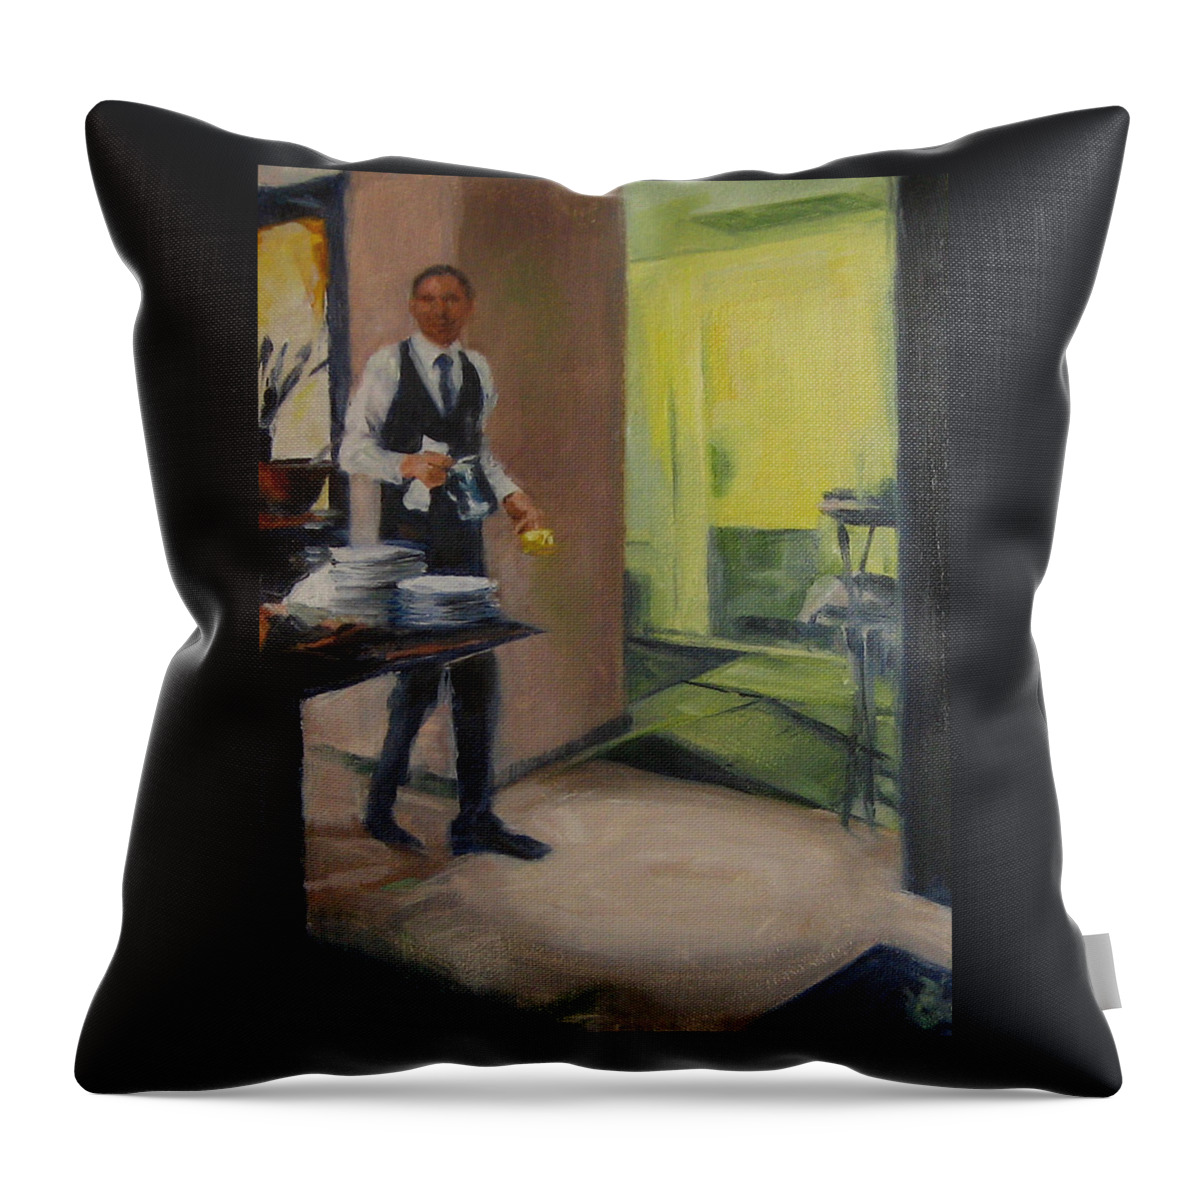 Waiter Throw Pillow featuring the painting Breakfast Service by Connie Schaertl